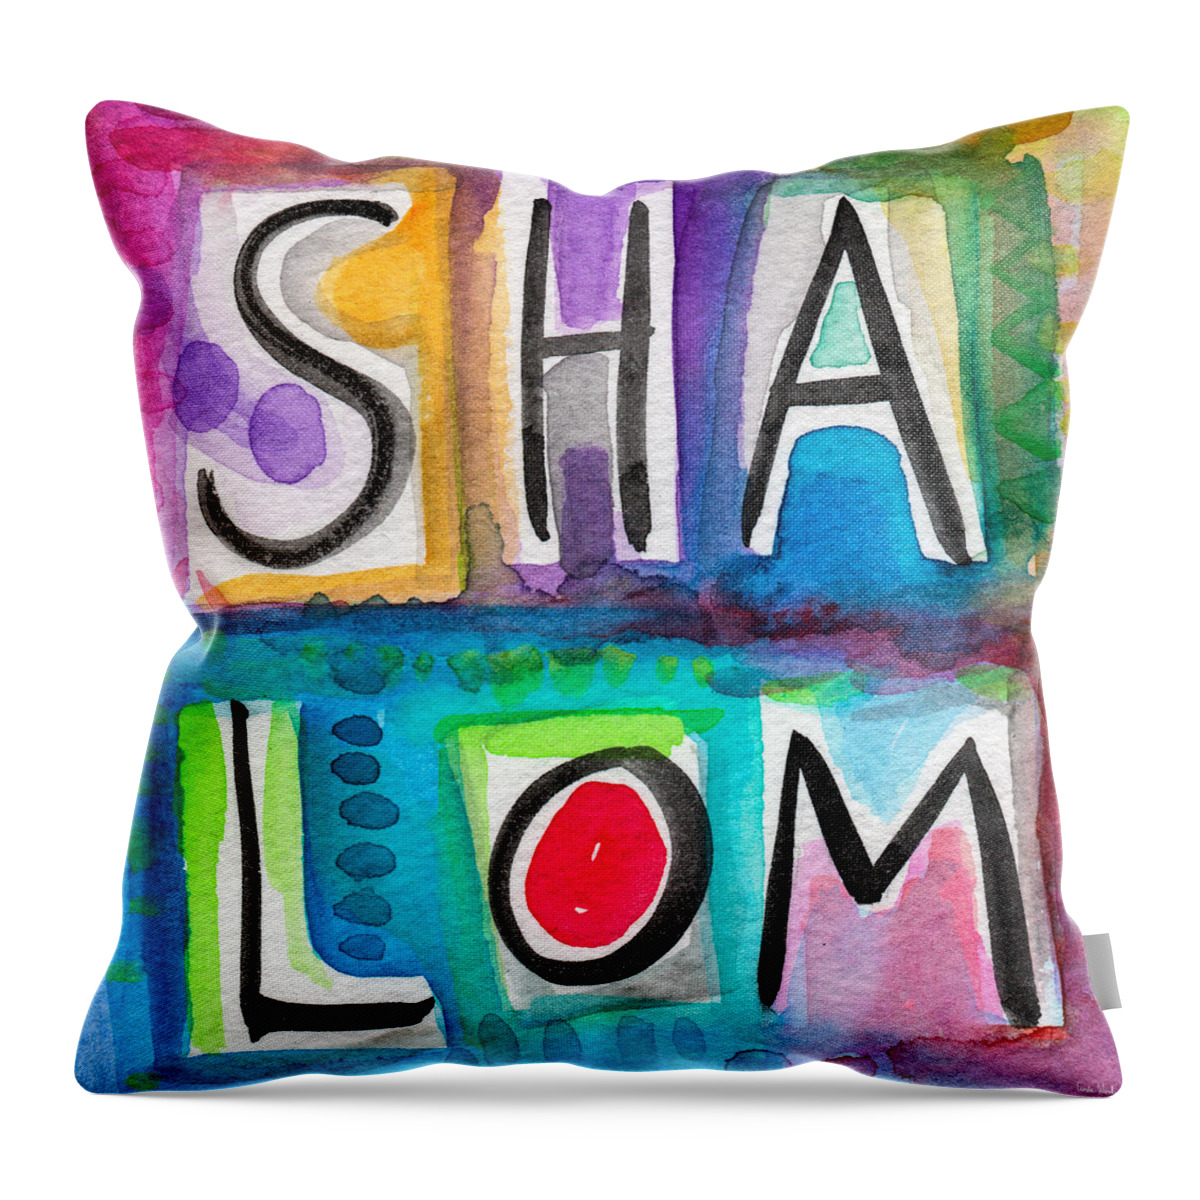 Shalom Throw Pillow featuring the painting Shalom Square- Art by Linda Woods by Linda Woods